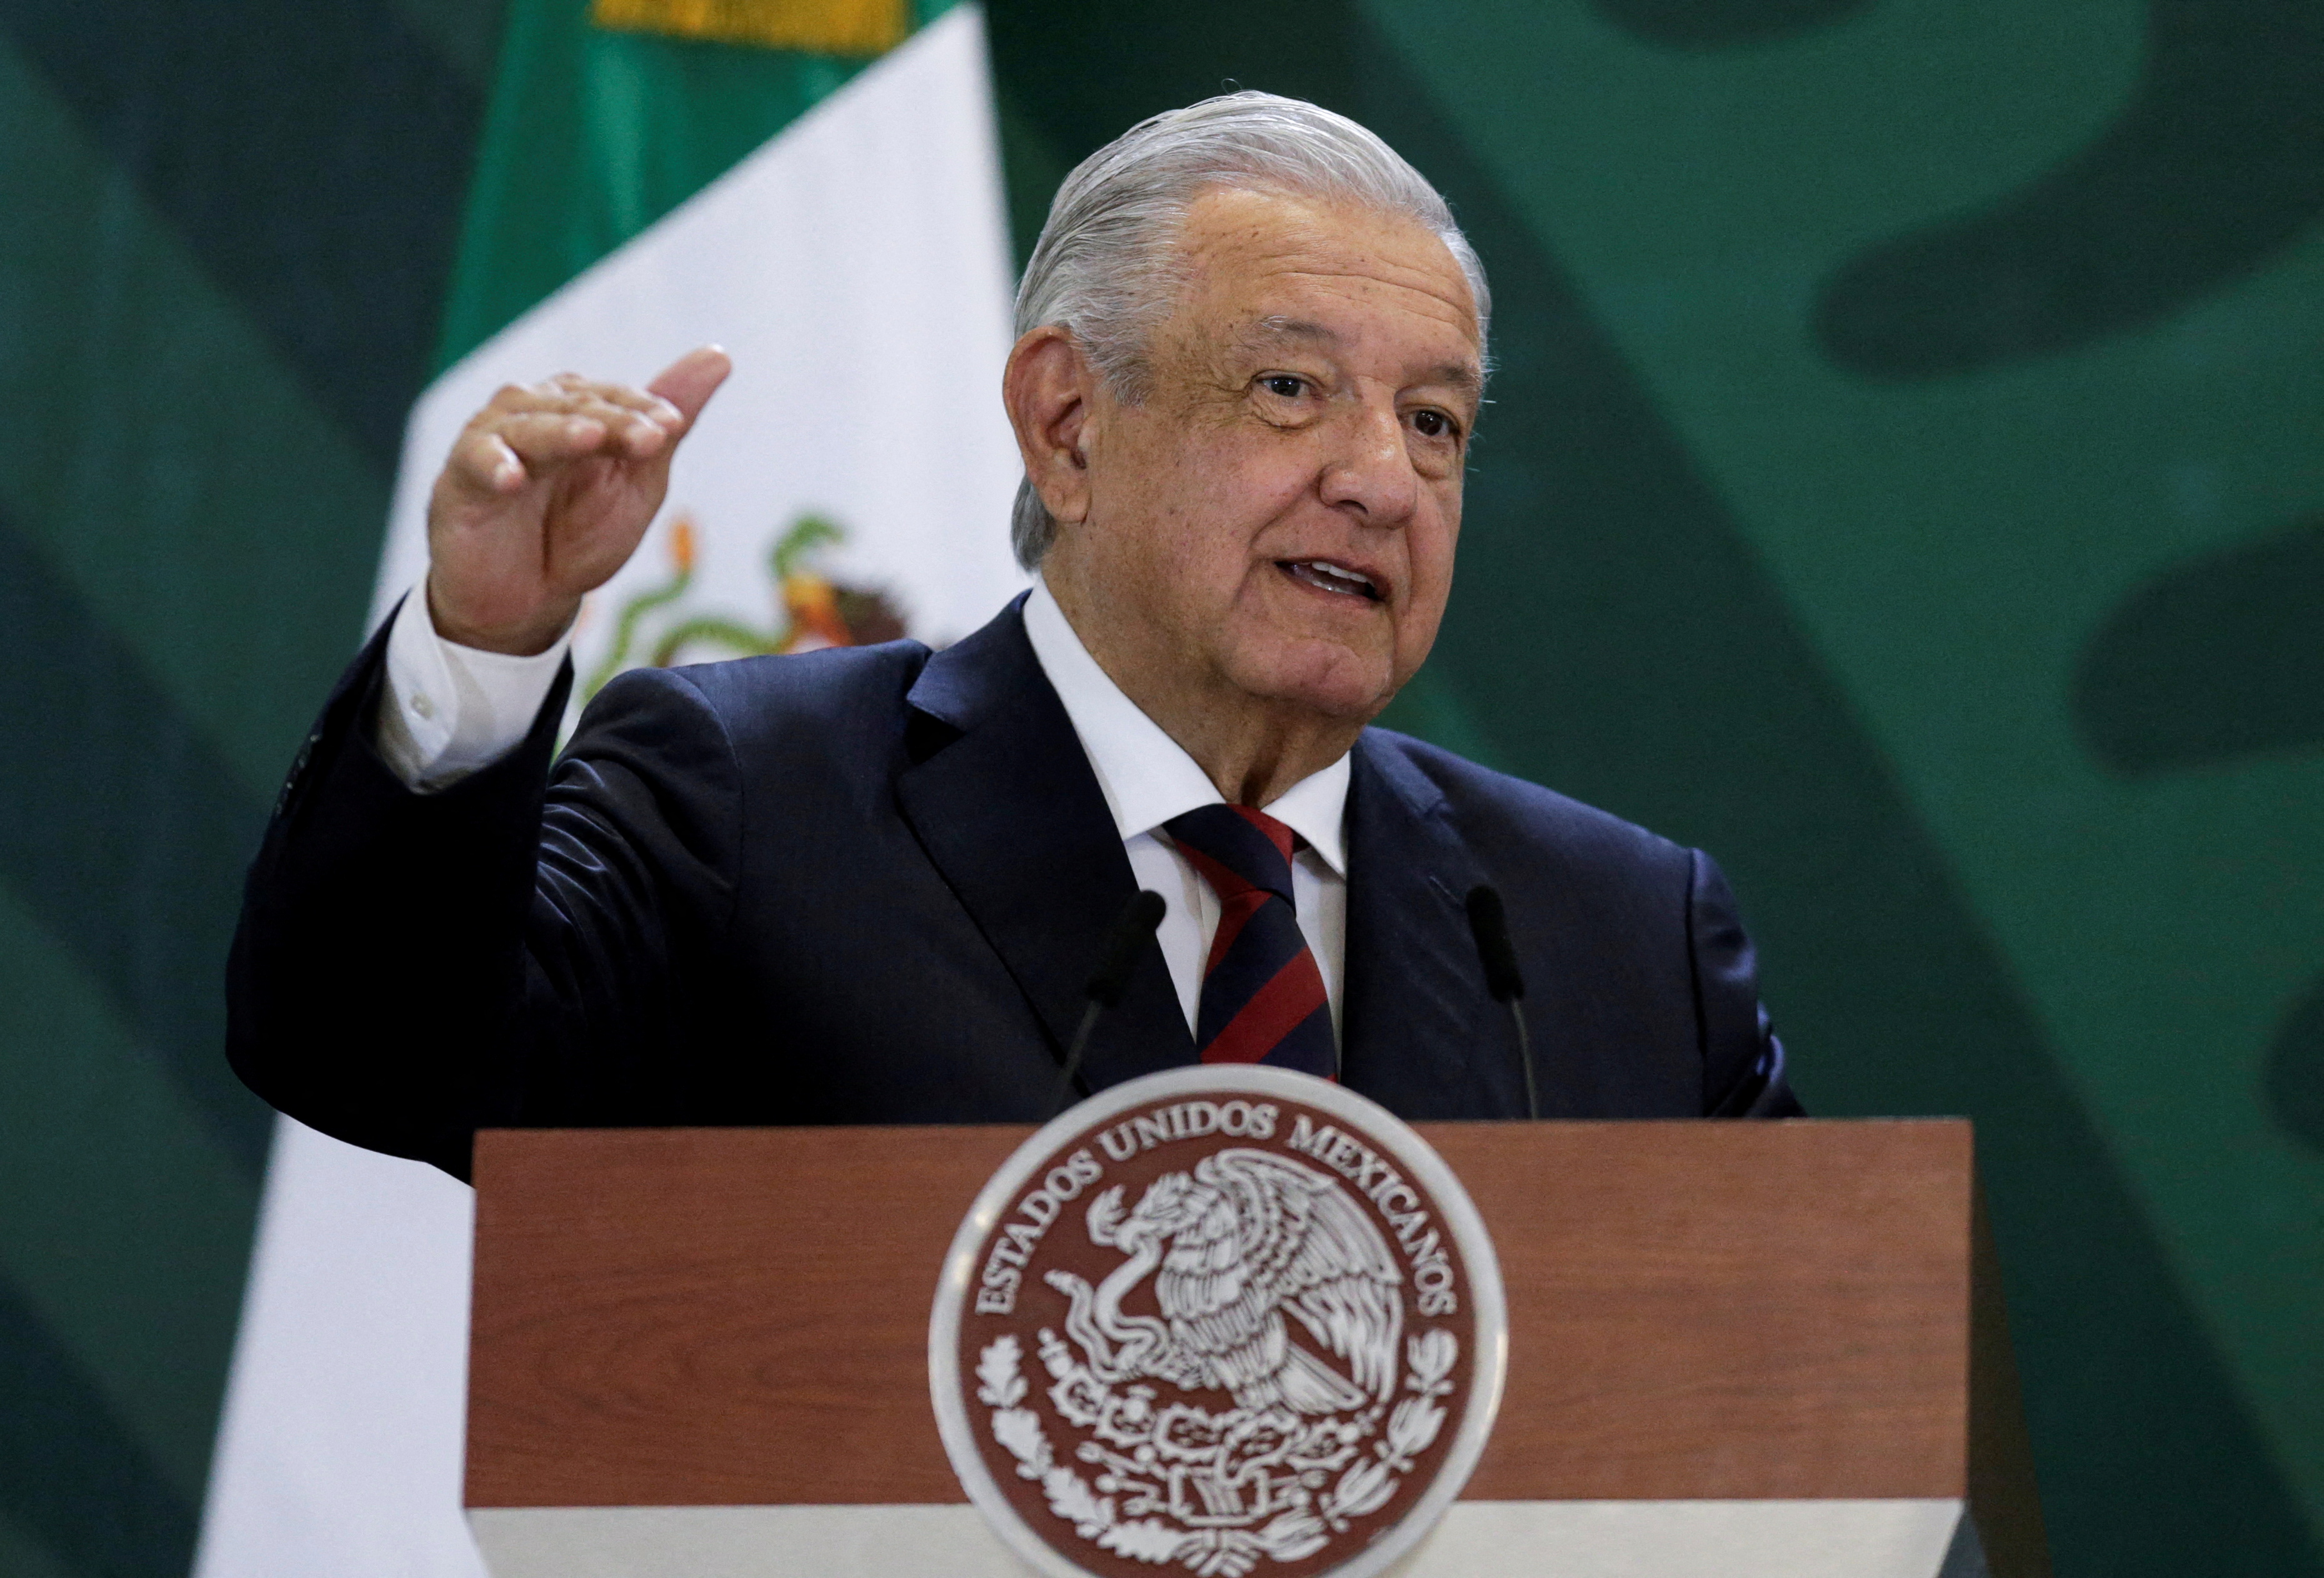 Mexico's President Andres Manuel Lopez Obrador speaks during a news conference at a military base, in Apodaca